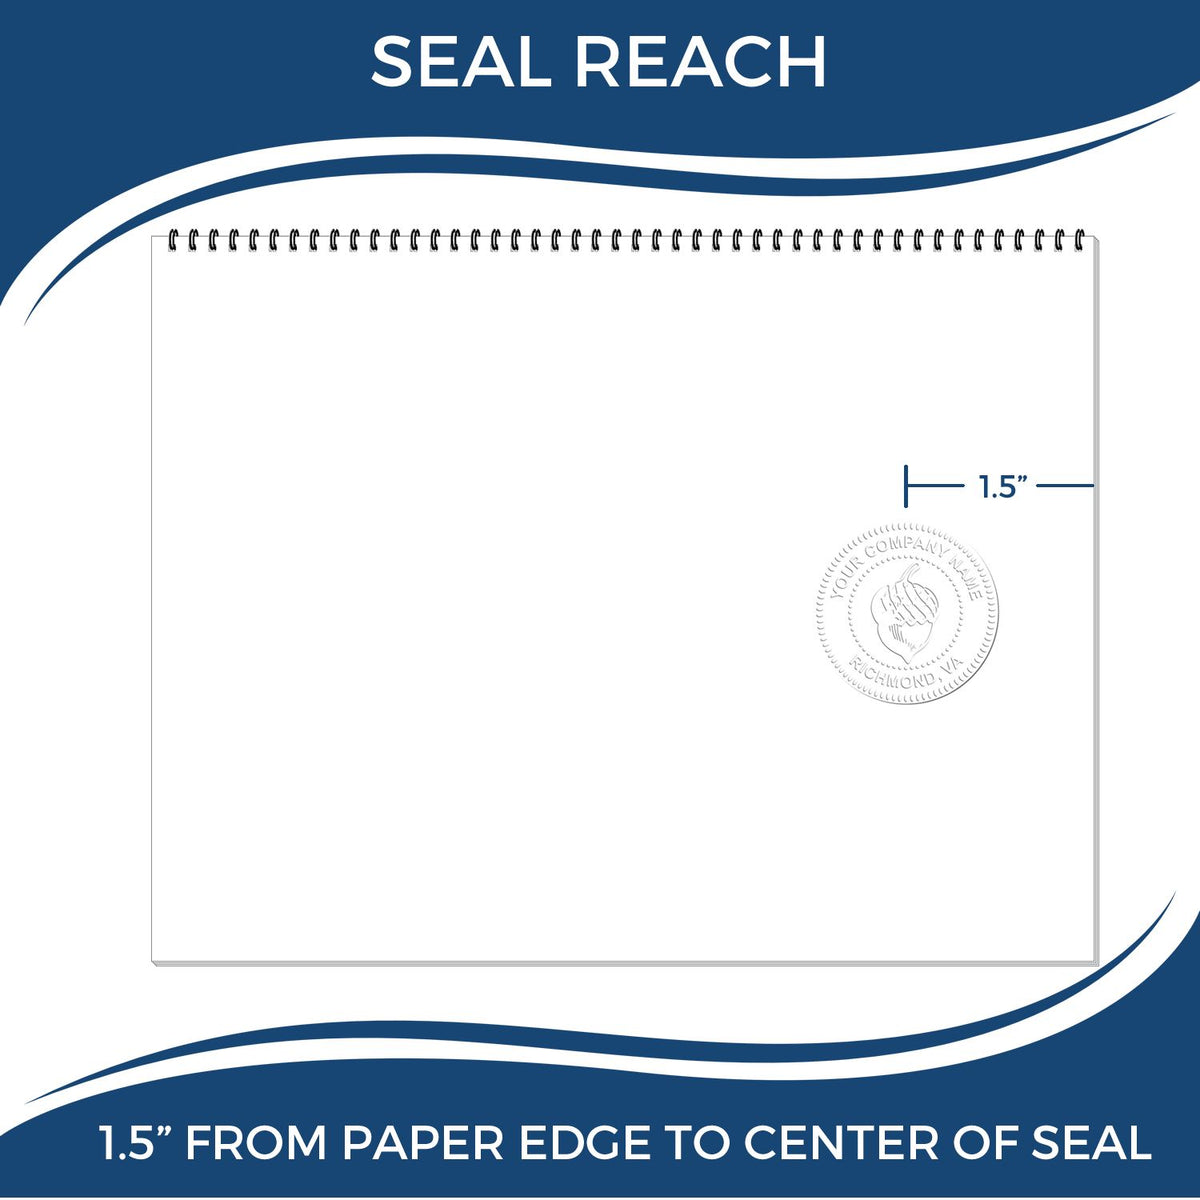 An infographic showing the seal reach which is represented by a ruler and a miniature seal image of the Handheld District of Columbia Land Surveyor Seal